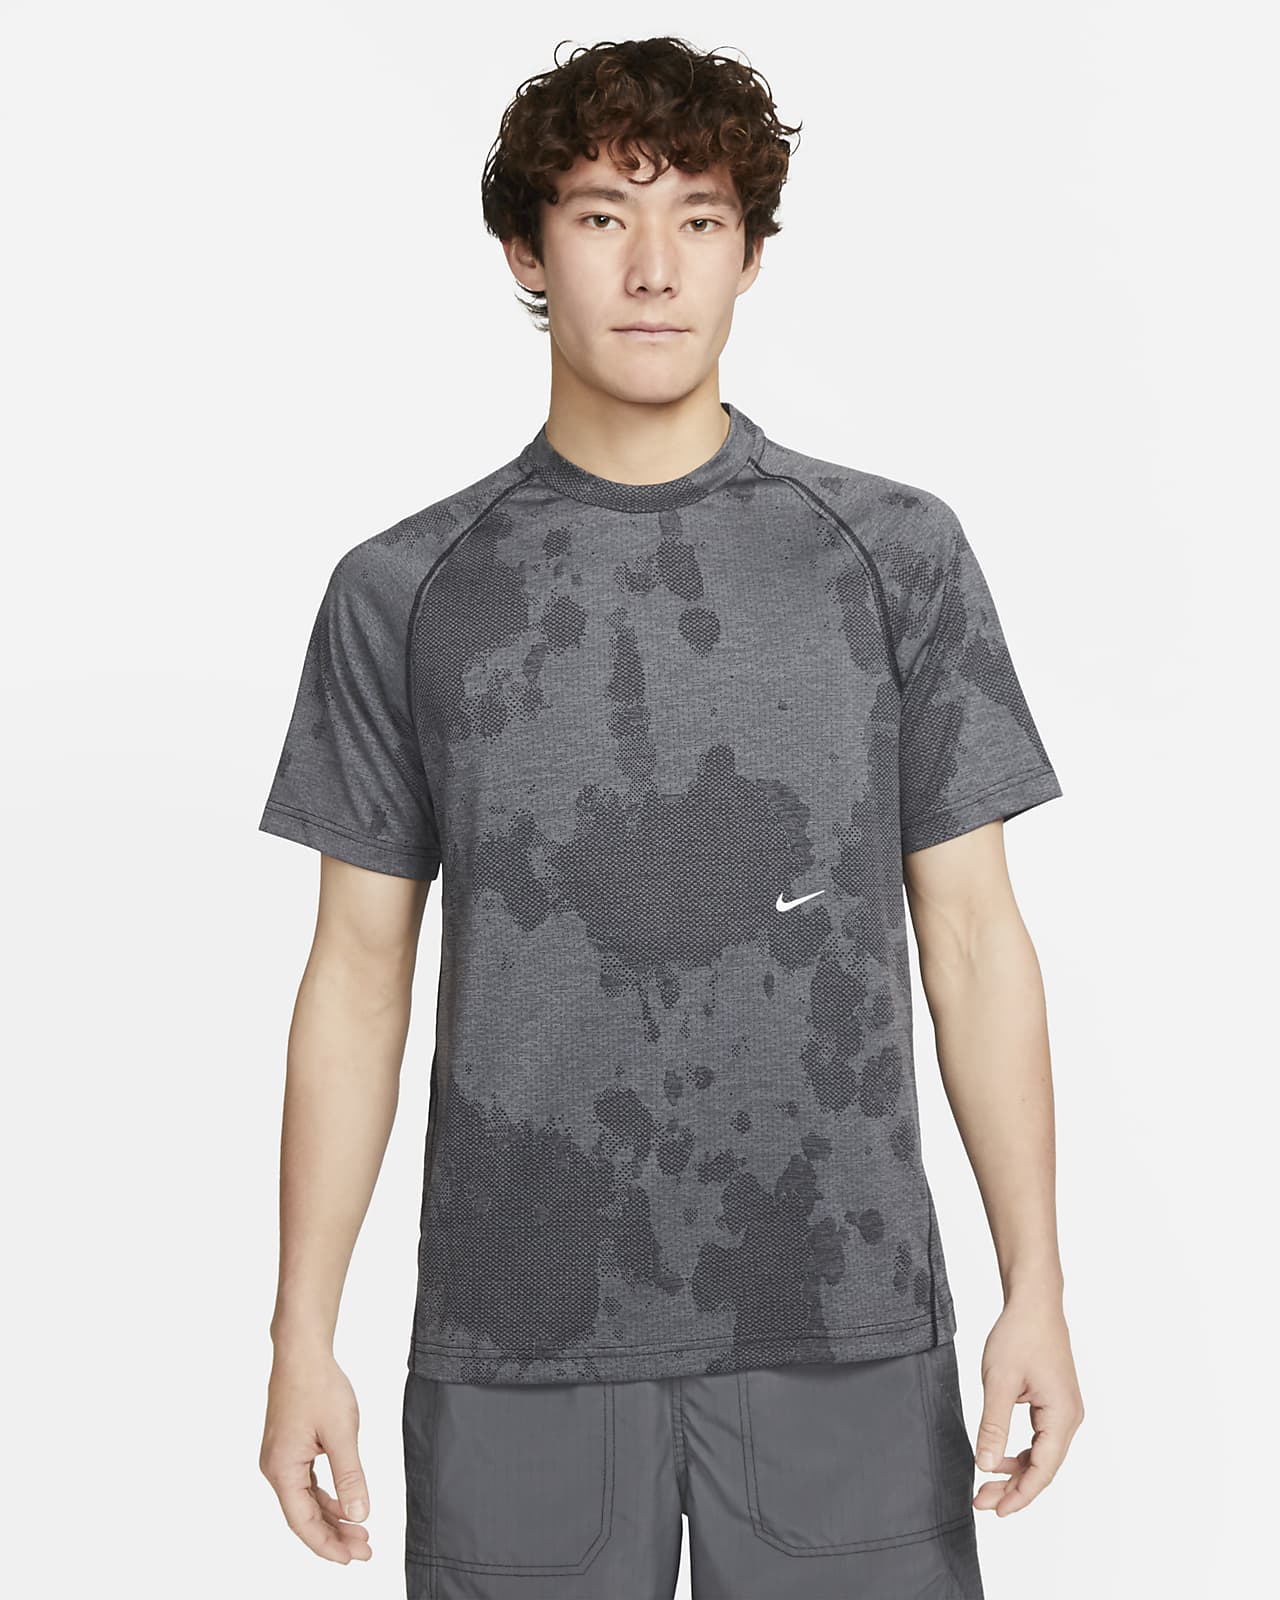 Nike Dri-FIT ADV A.P.S. Men's Engineered Short-Sleeve Fitness Top